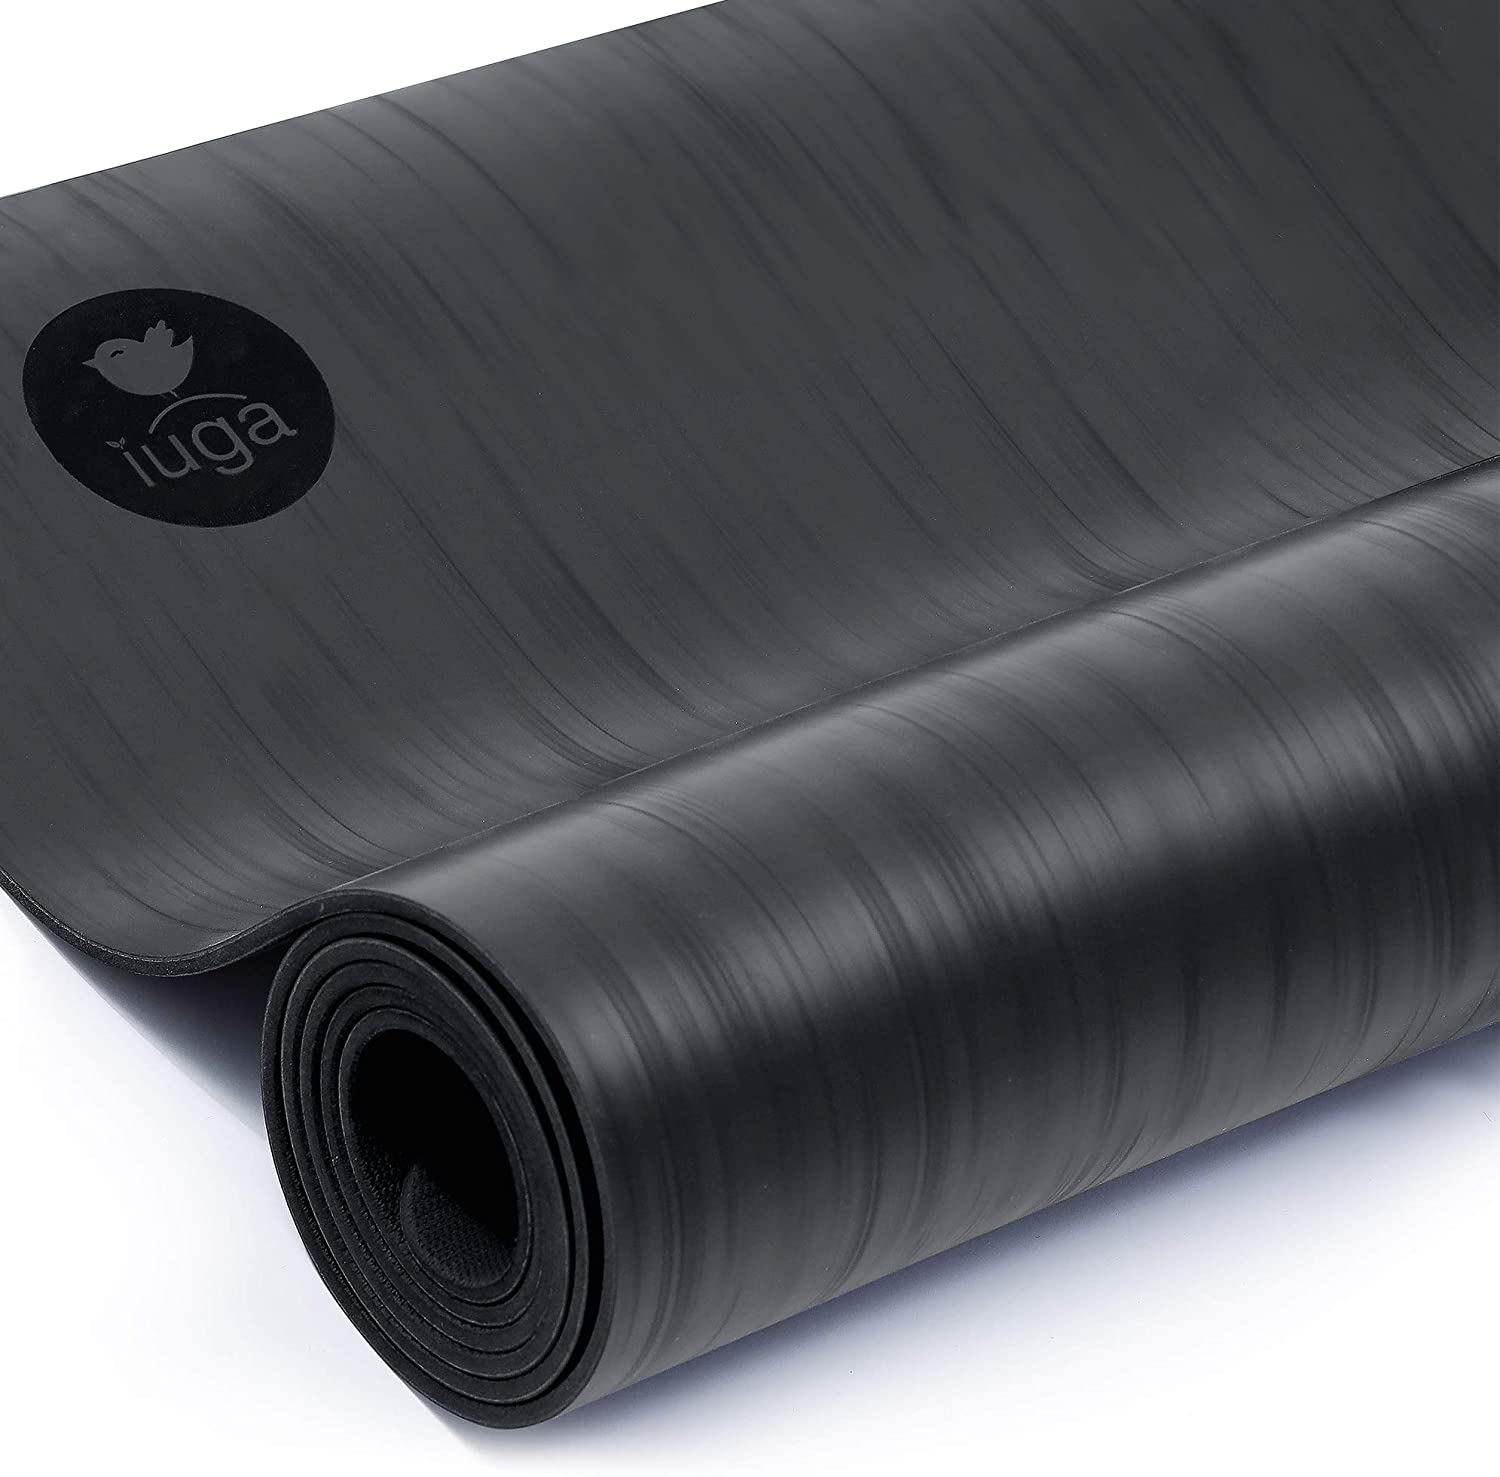 Find Your Ground: A Review of the Best Thick Non-Slip Yoga Mats